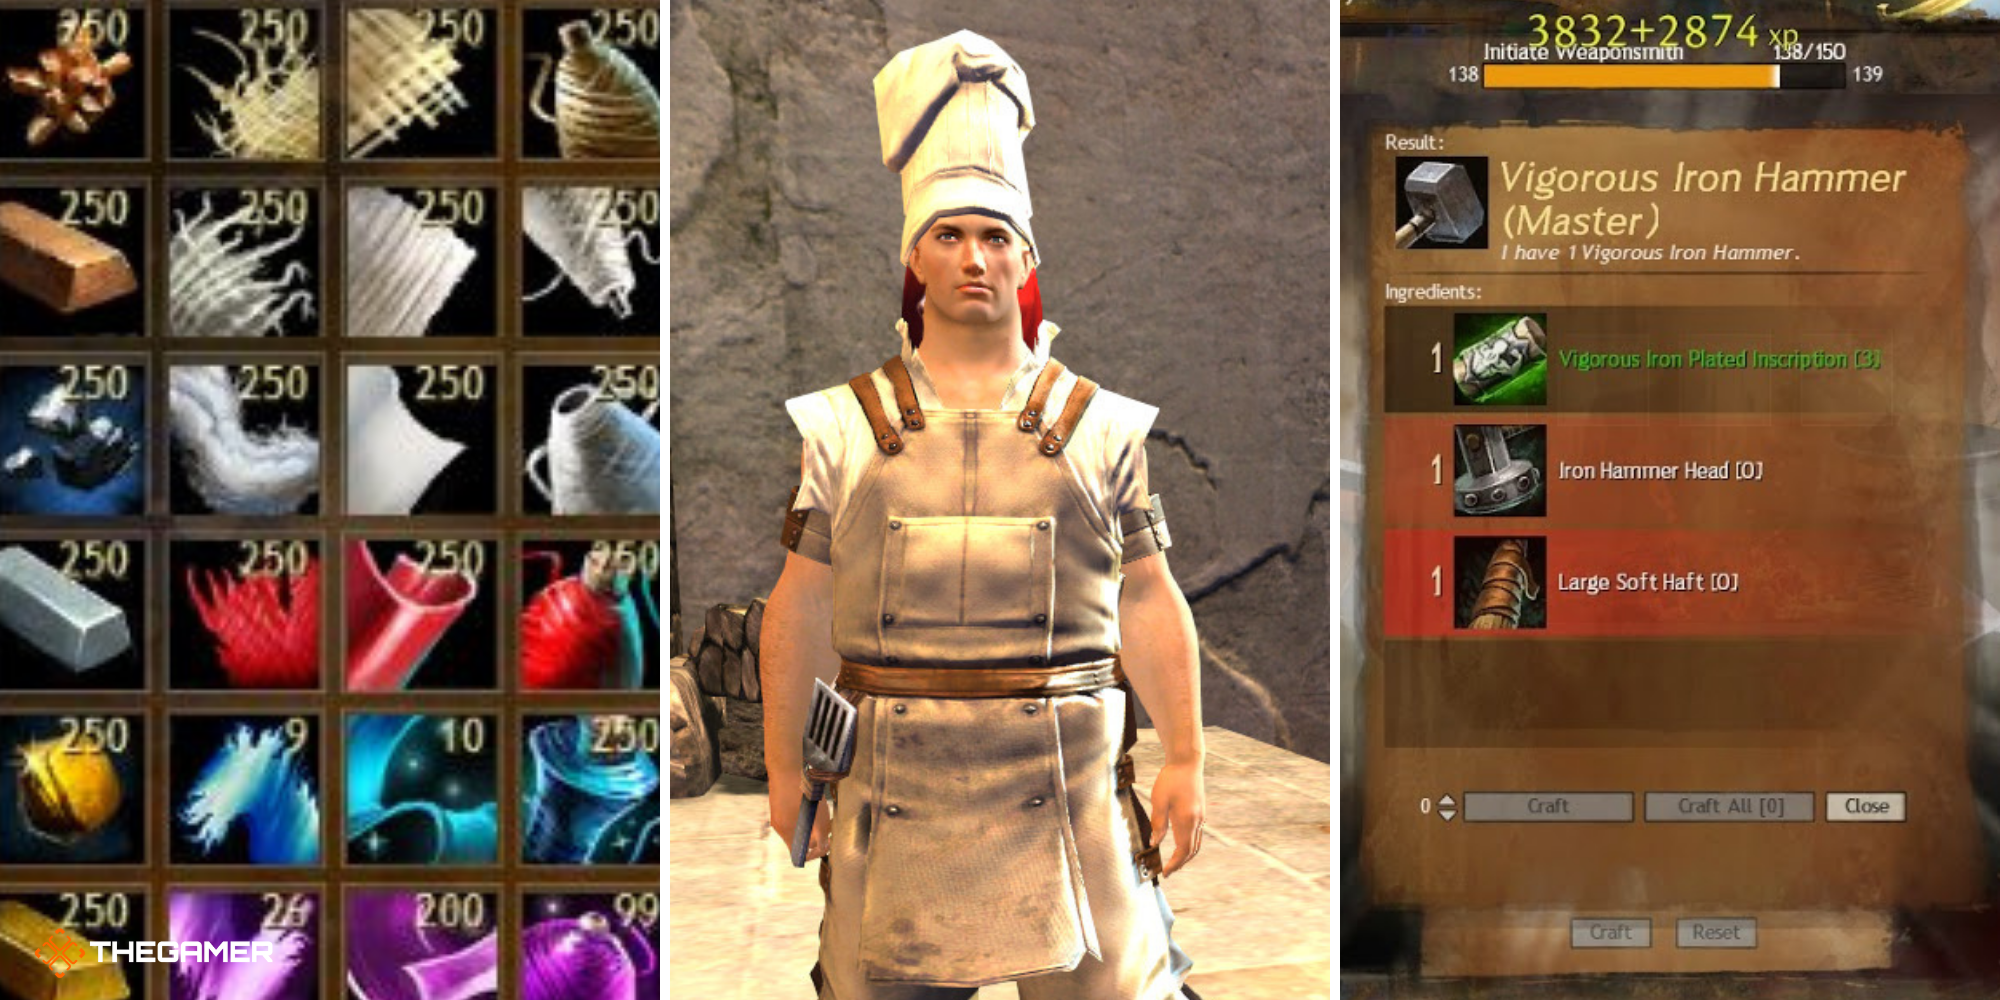 GW2 Crafting - Split image of chef in centre, materials on left, crafting a hammer on the right